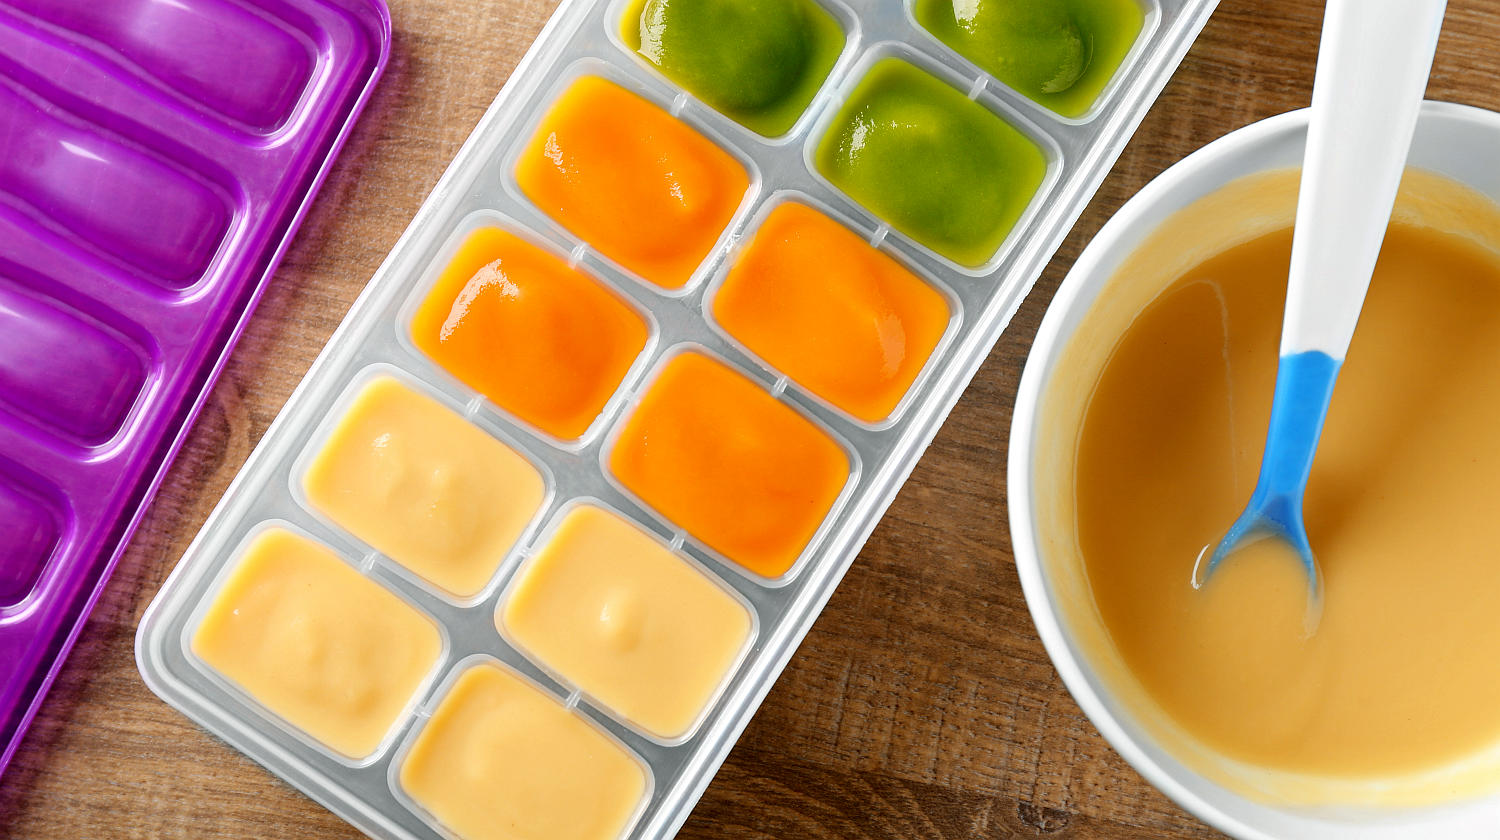 Feature | Container bowl baby food on table | Brilliant Ice Cube Tray Hacks You Can Do At Home